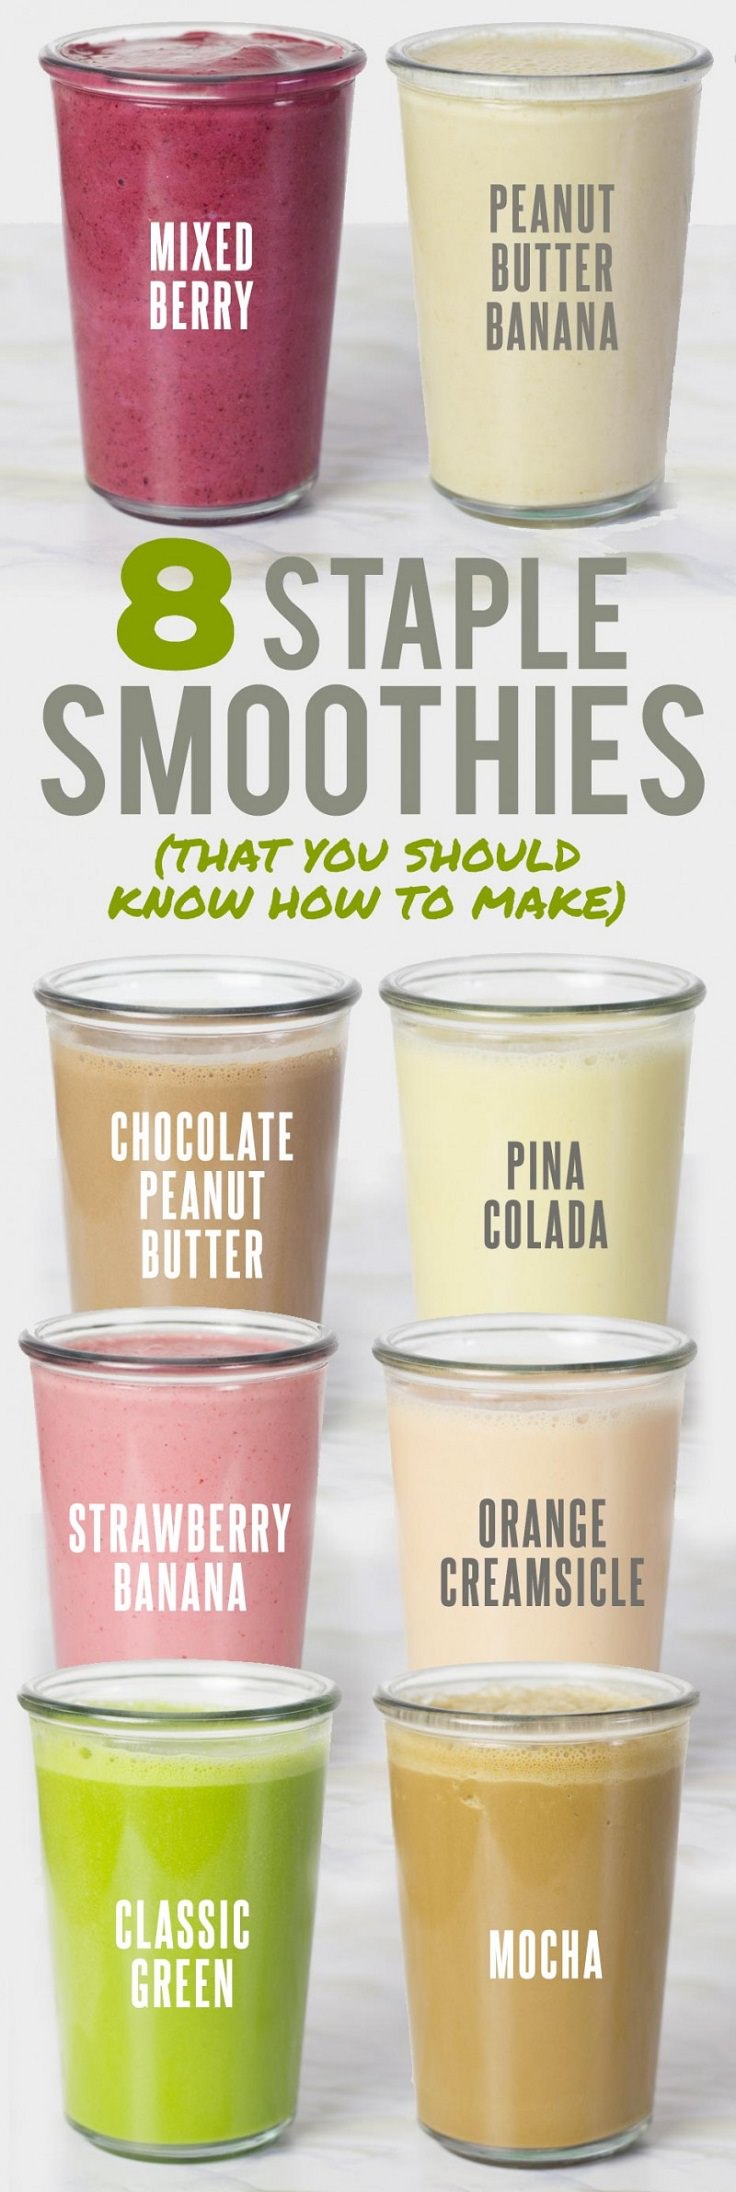 Learn some great tips and tricks to make smoothies, plus some 8 best smoothie recipes. Check out!